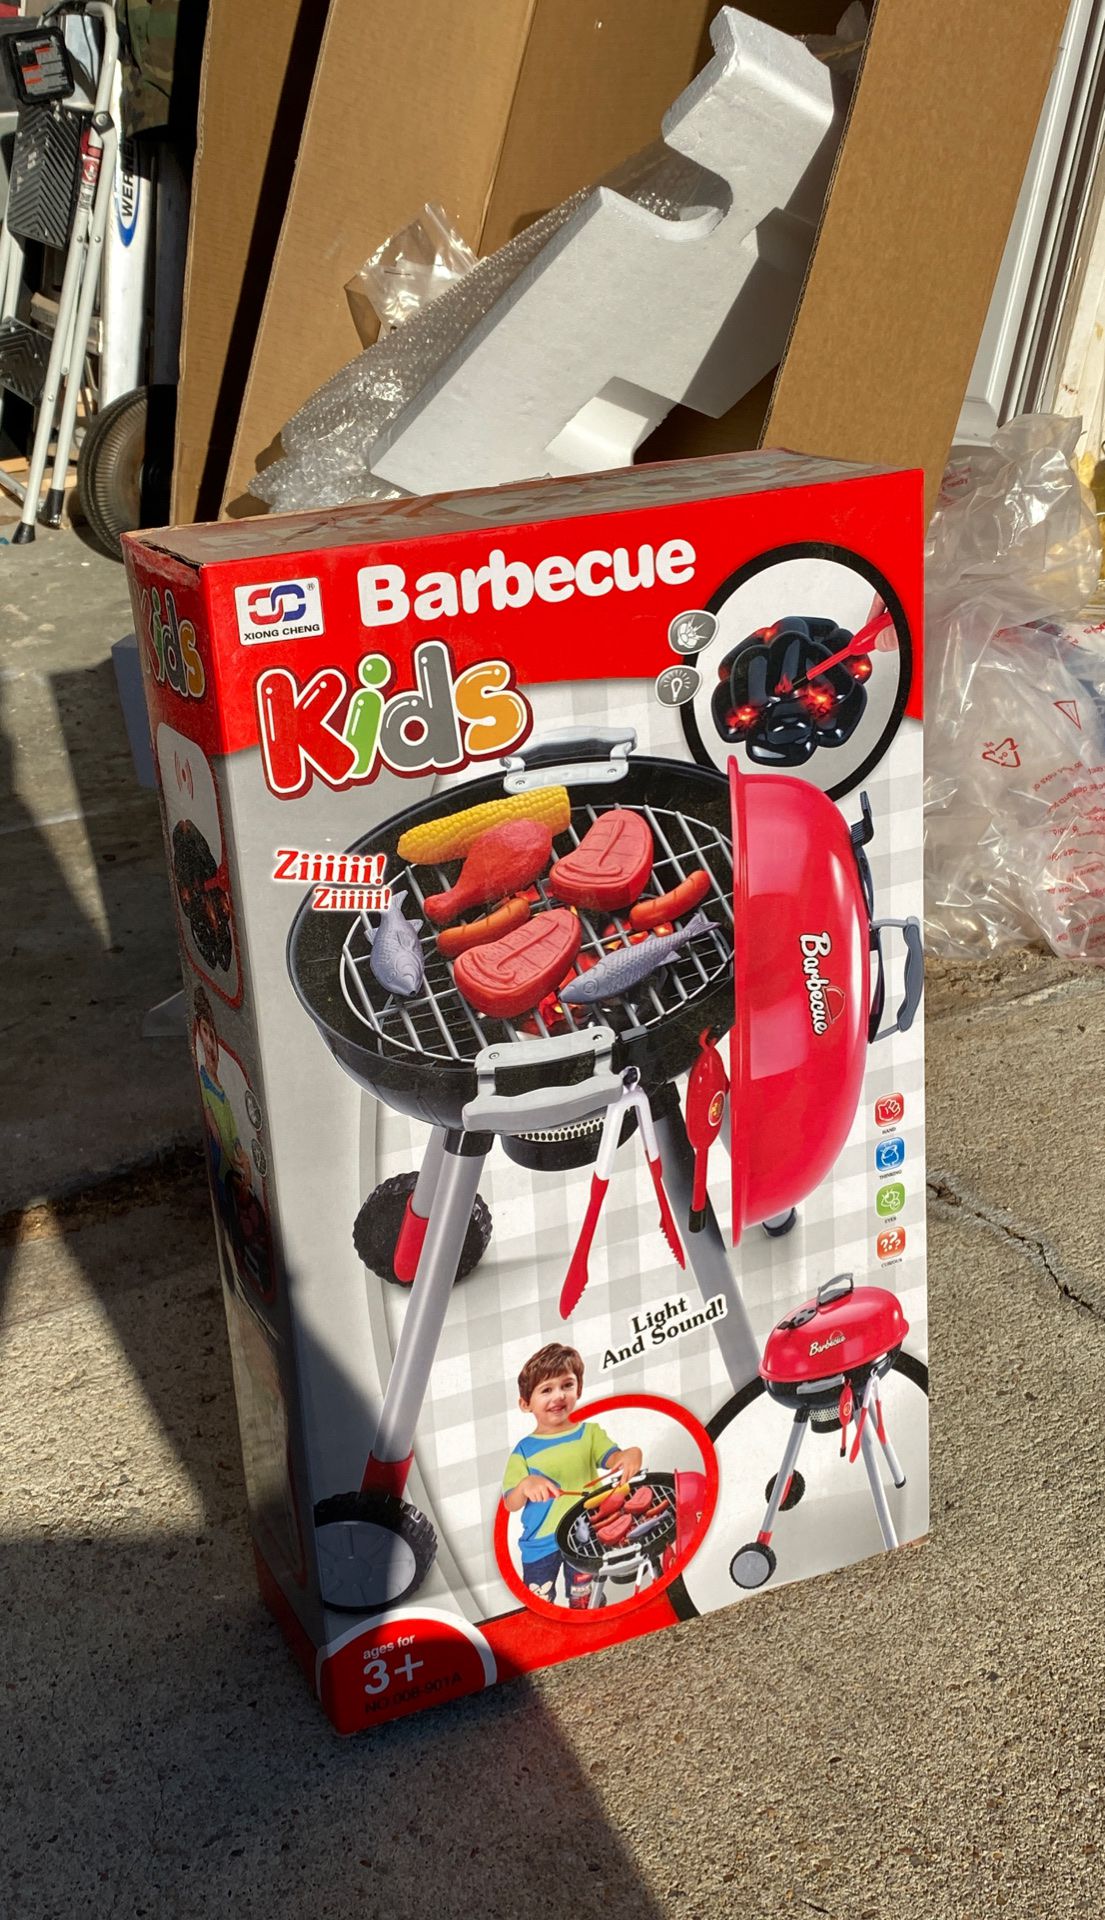 Toy grill